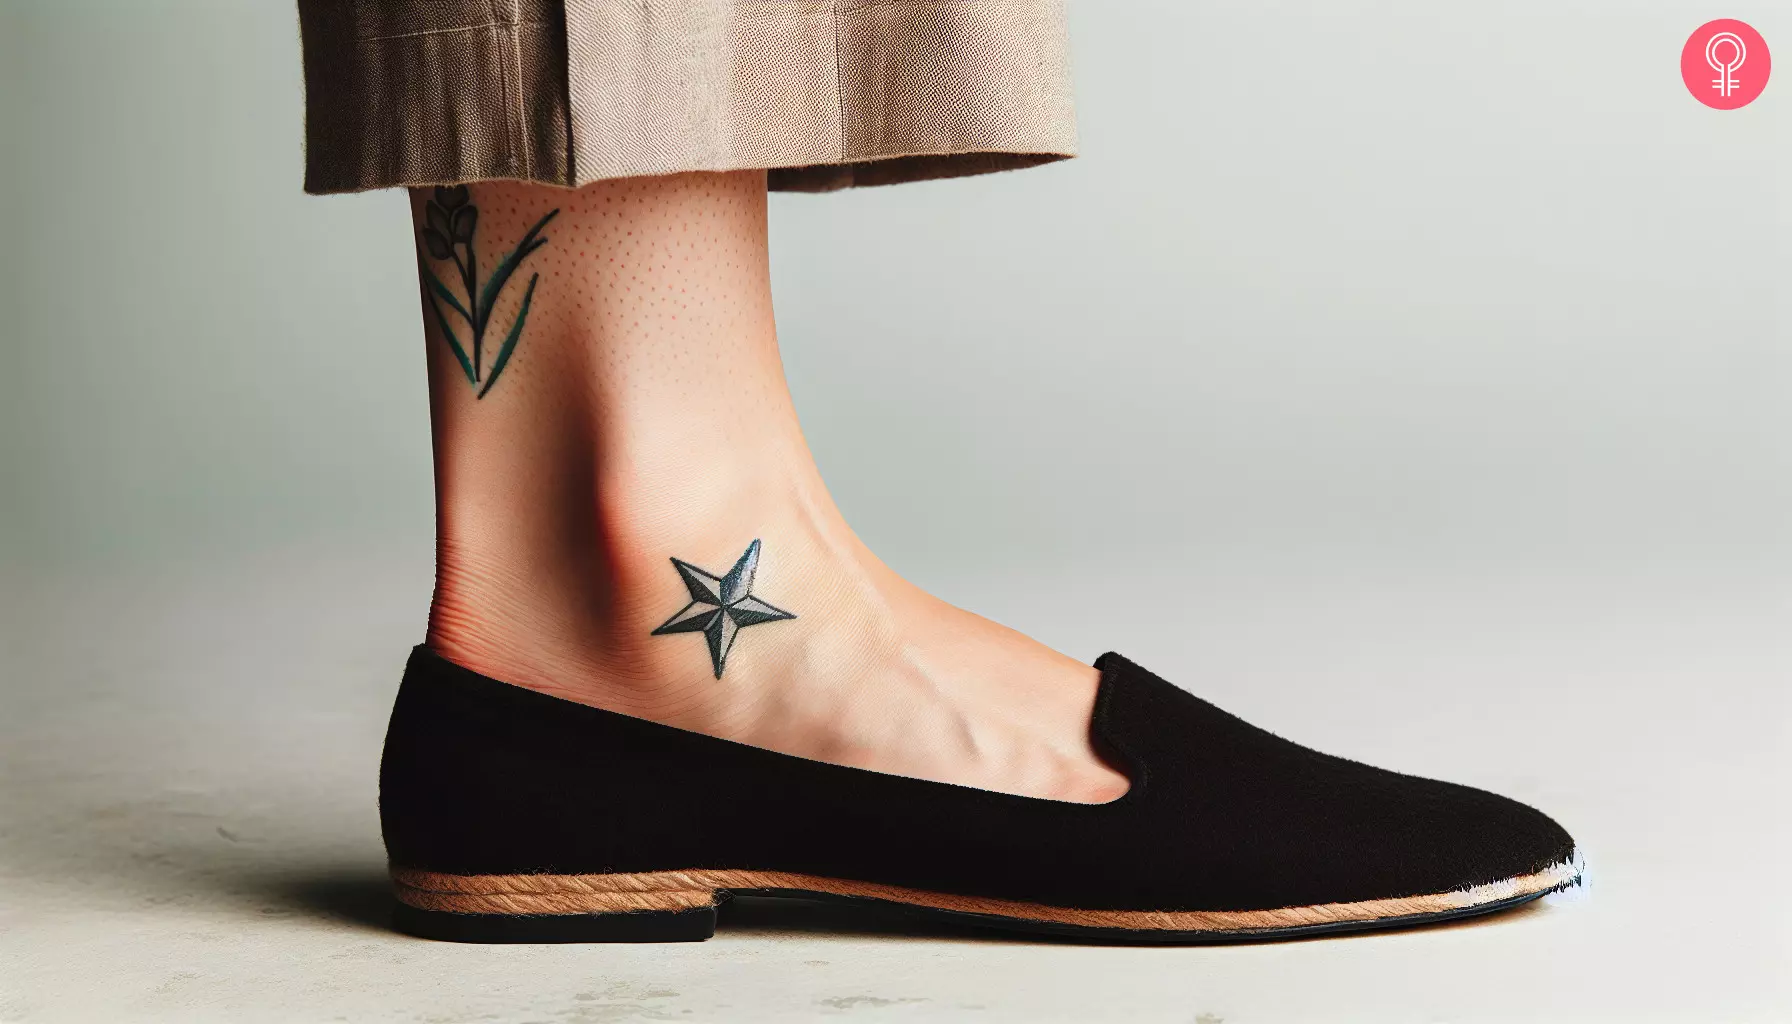 A line star tattoo on the inner ankle